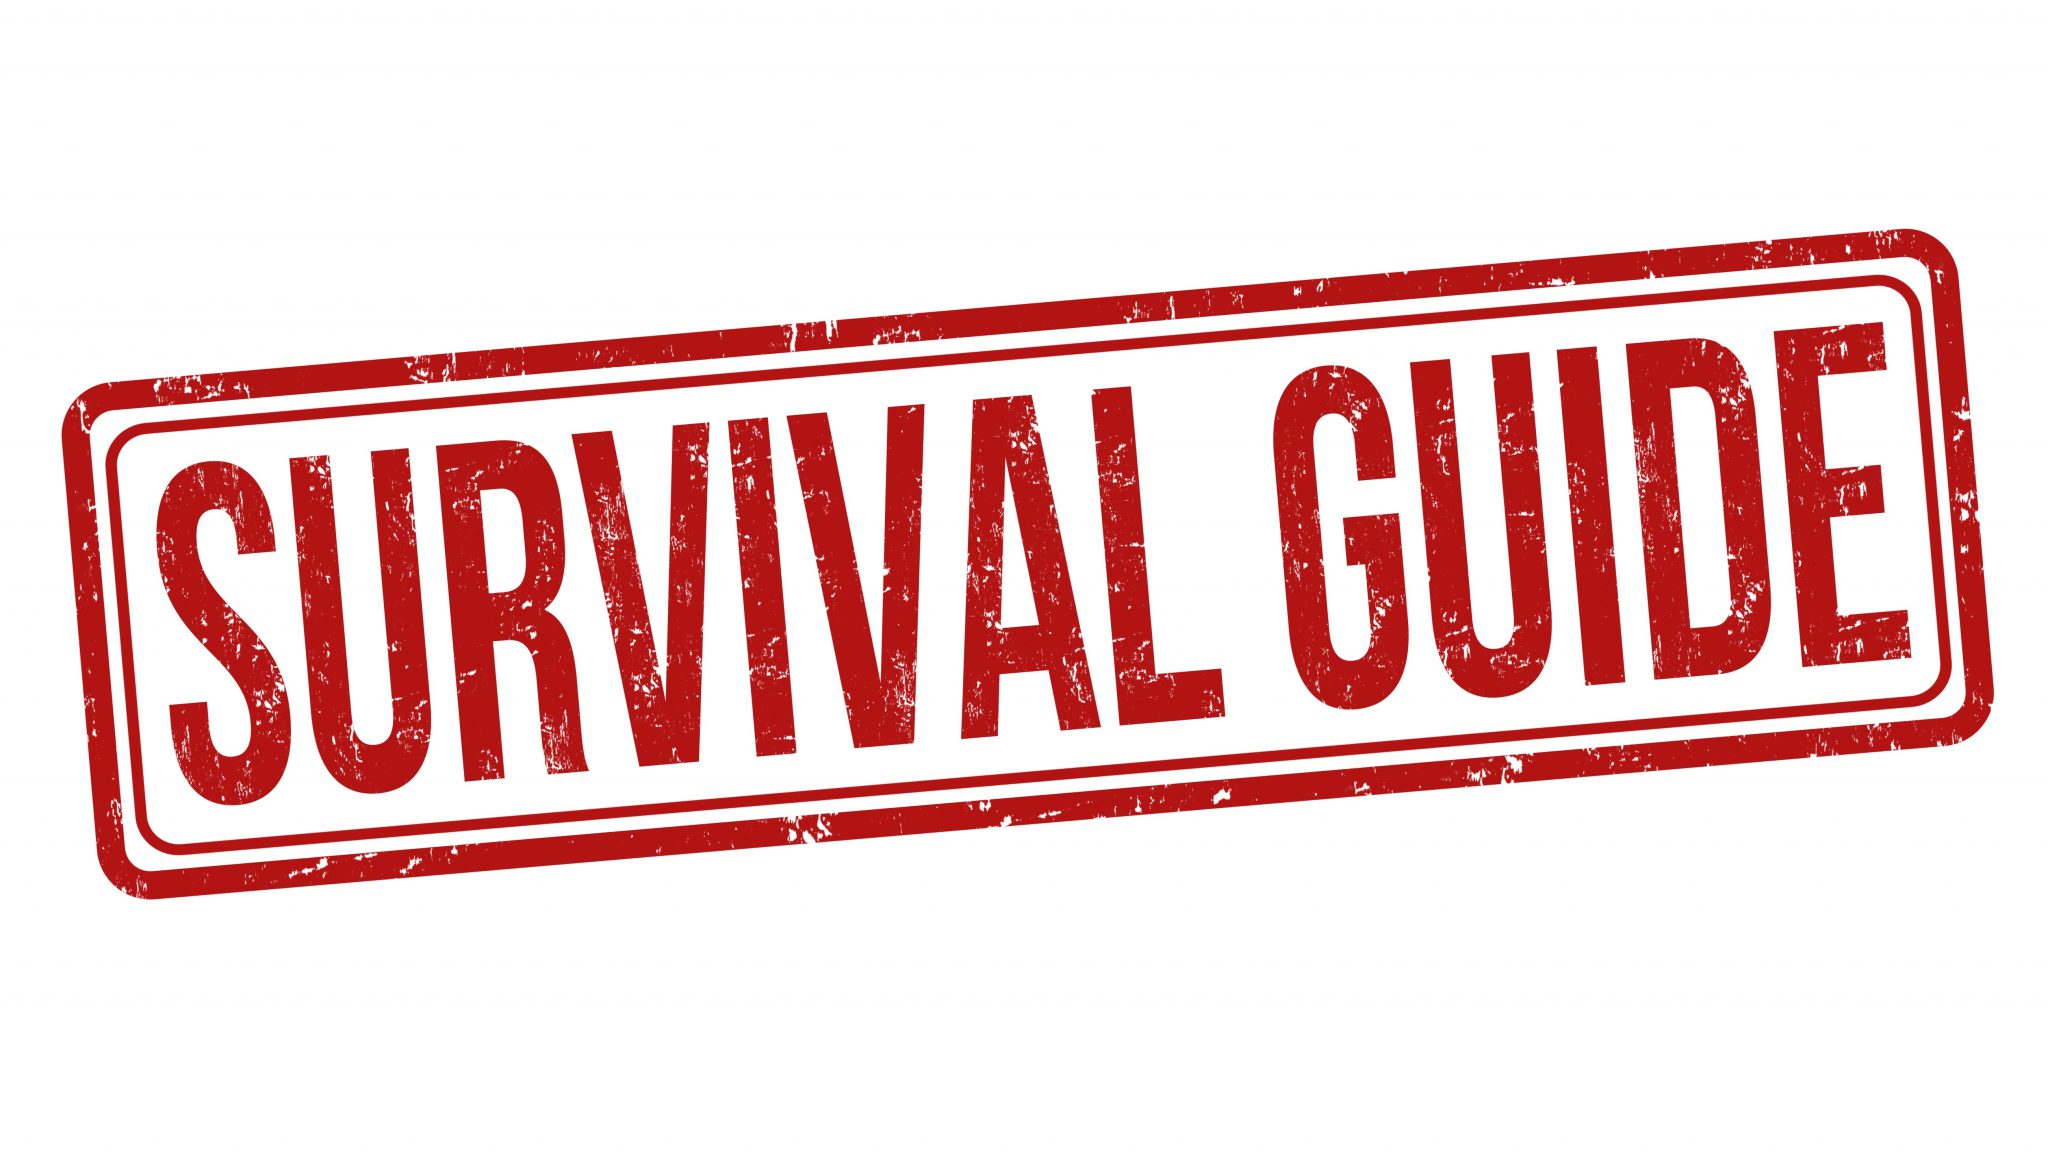 Illustration of a red survival guide sign against a white background - LandmanLife